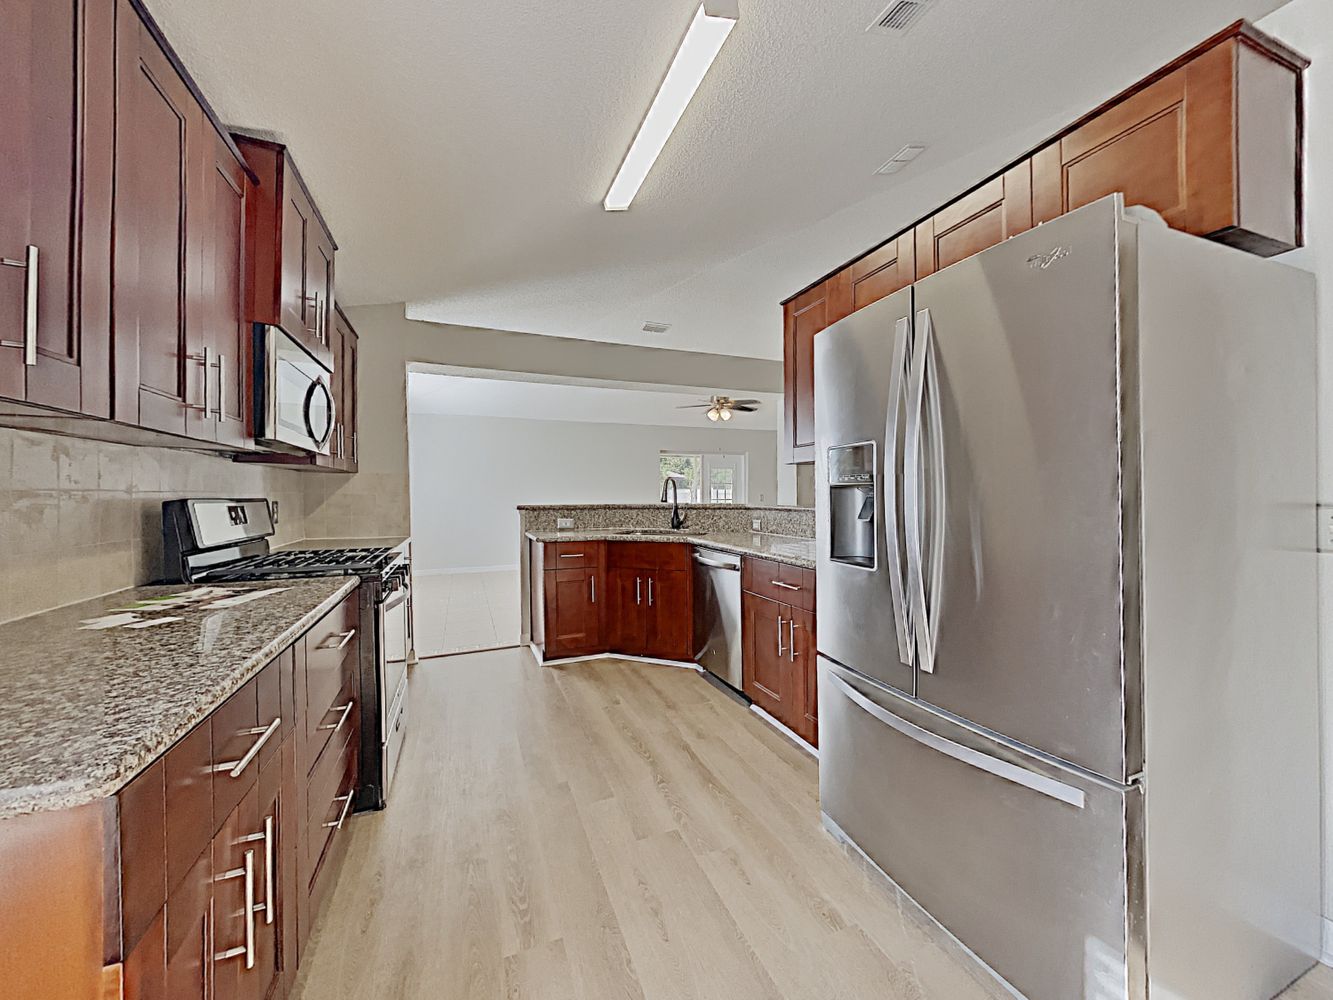 Spacious kitchen with stainless steel appliances and plenty of storage at Invitation Homes Jacksonville.